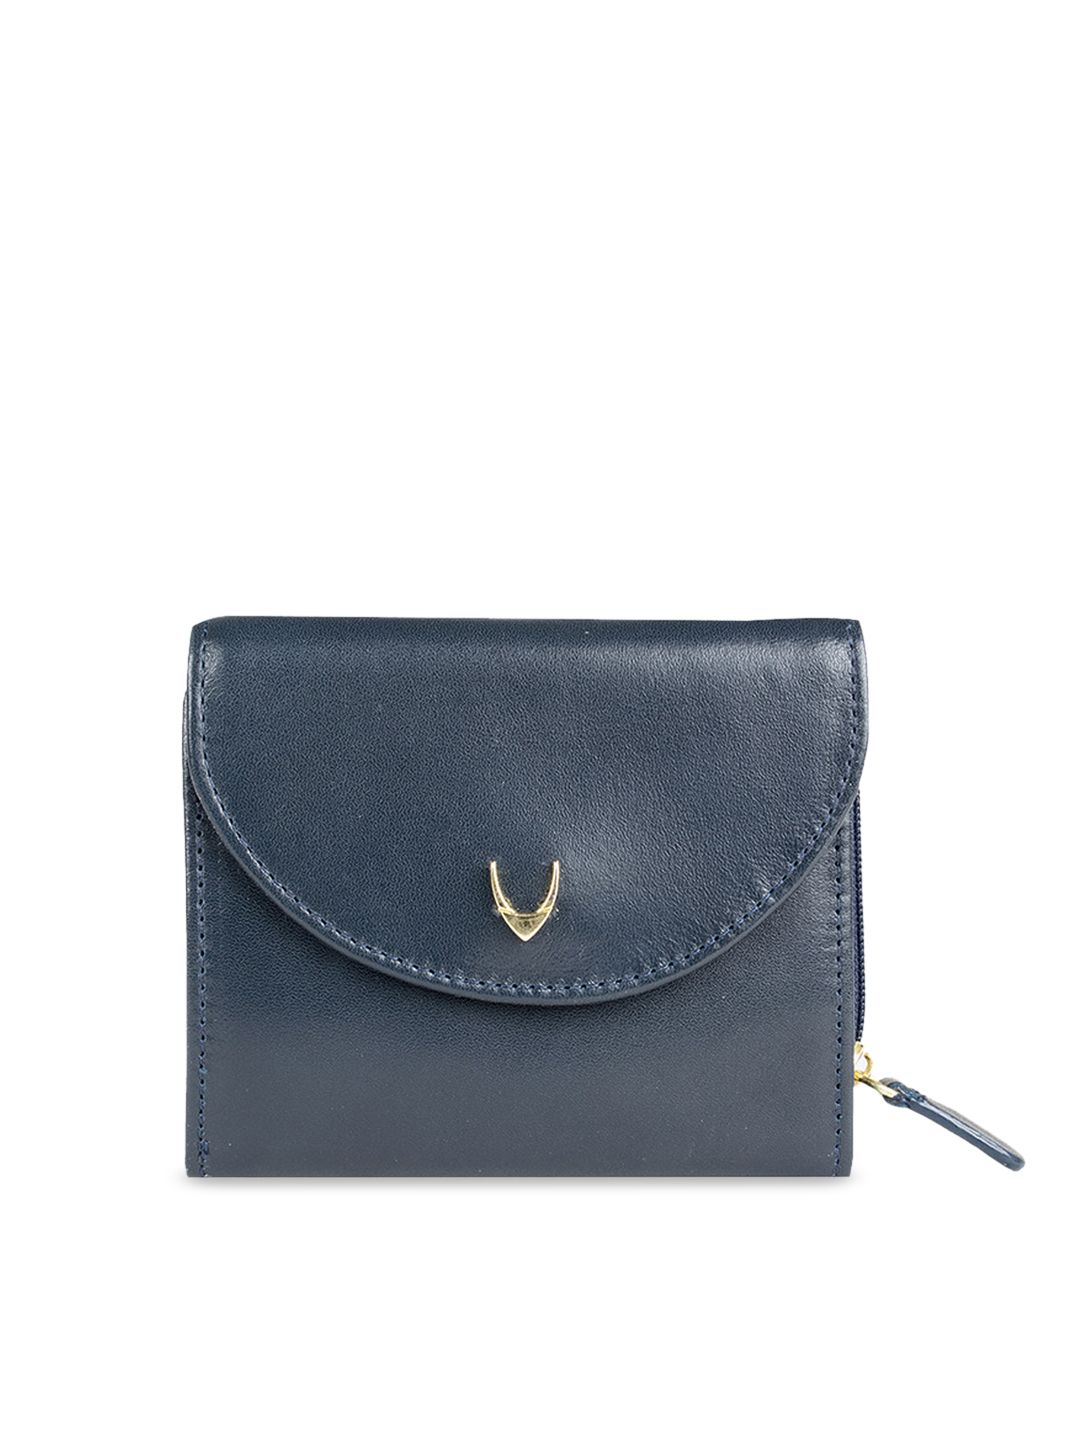 Hidesign Women Blue Solid Leather Two Fold Wallet Price in India